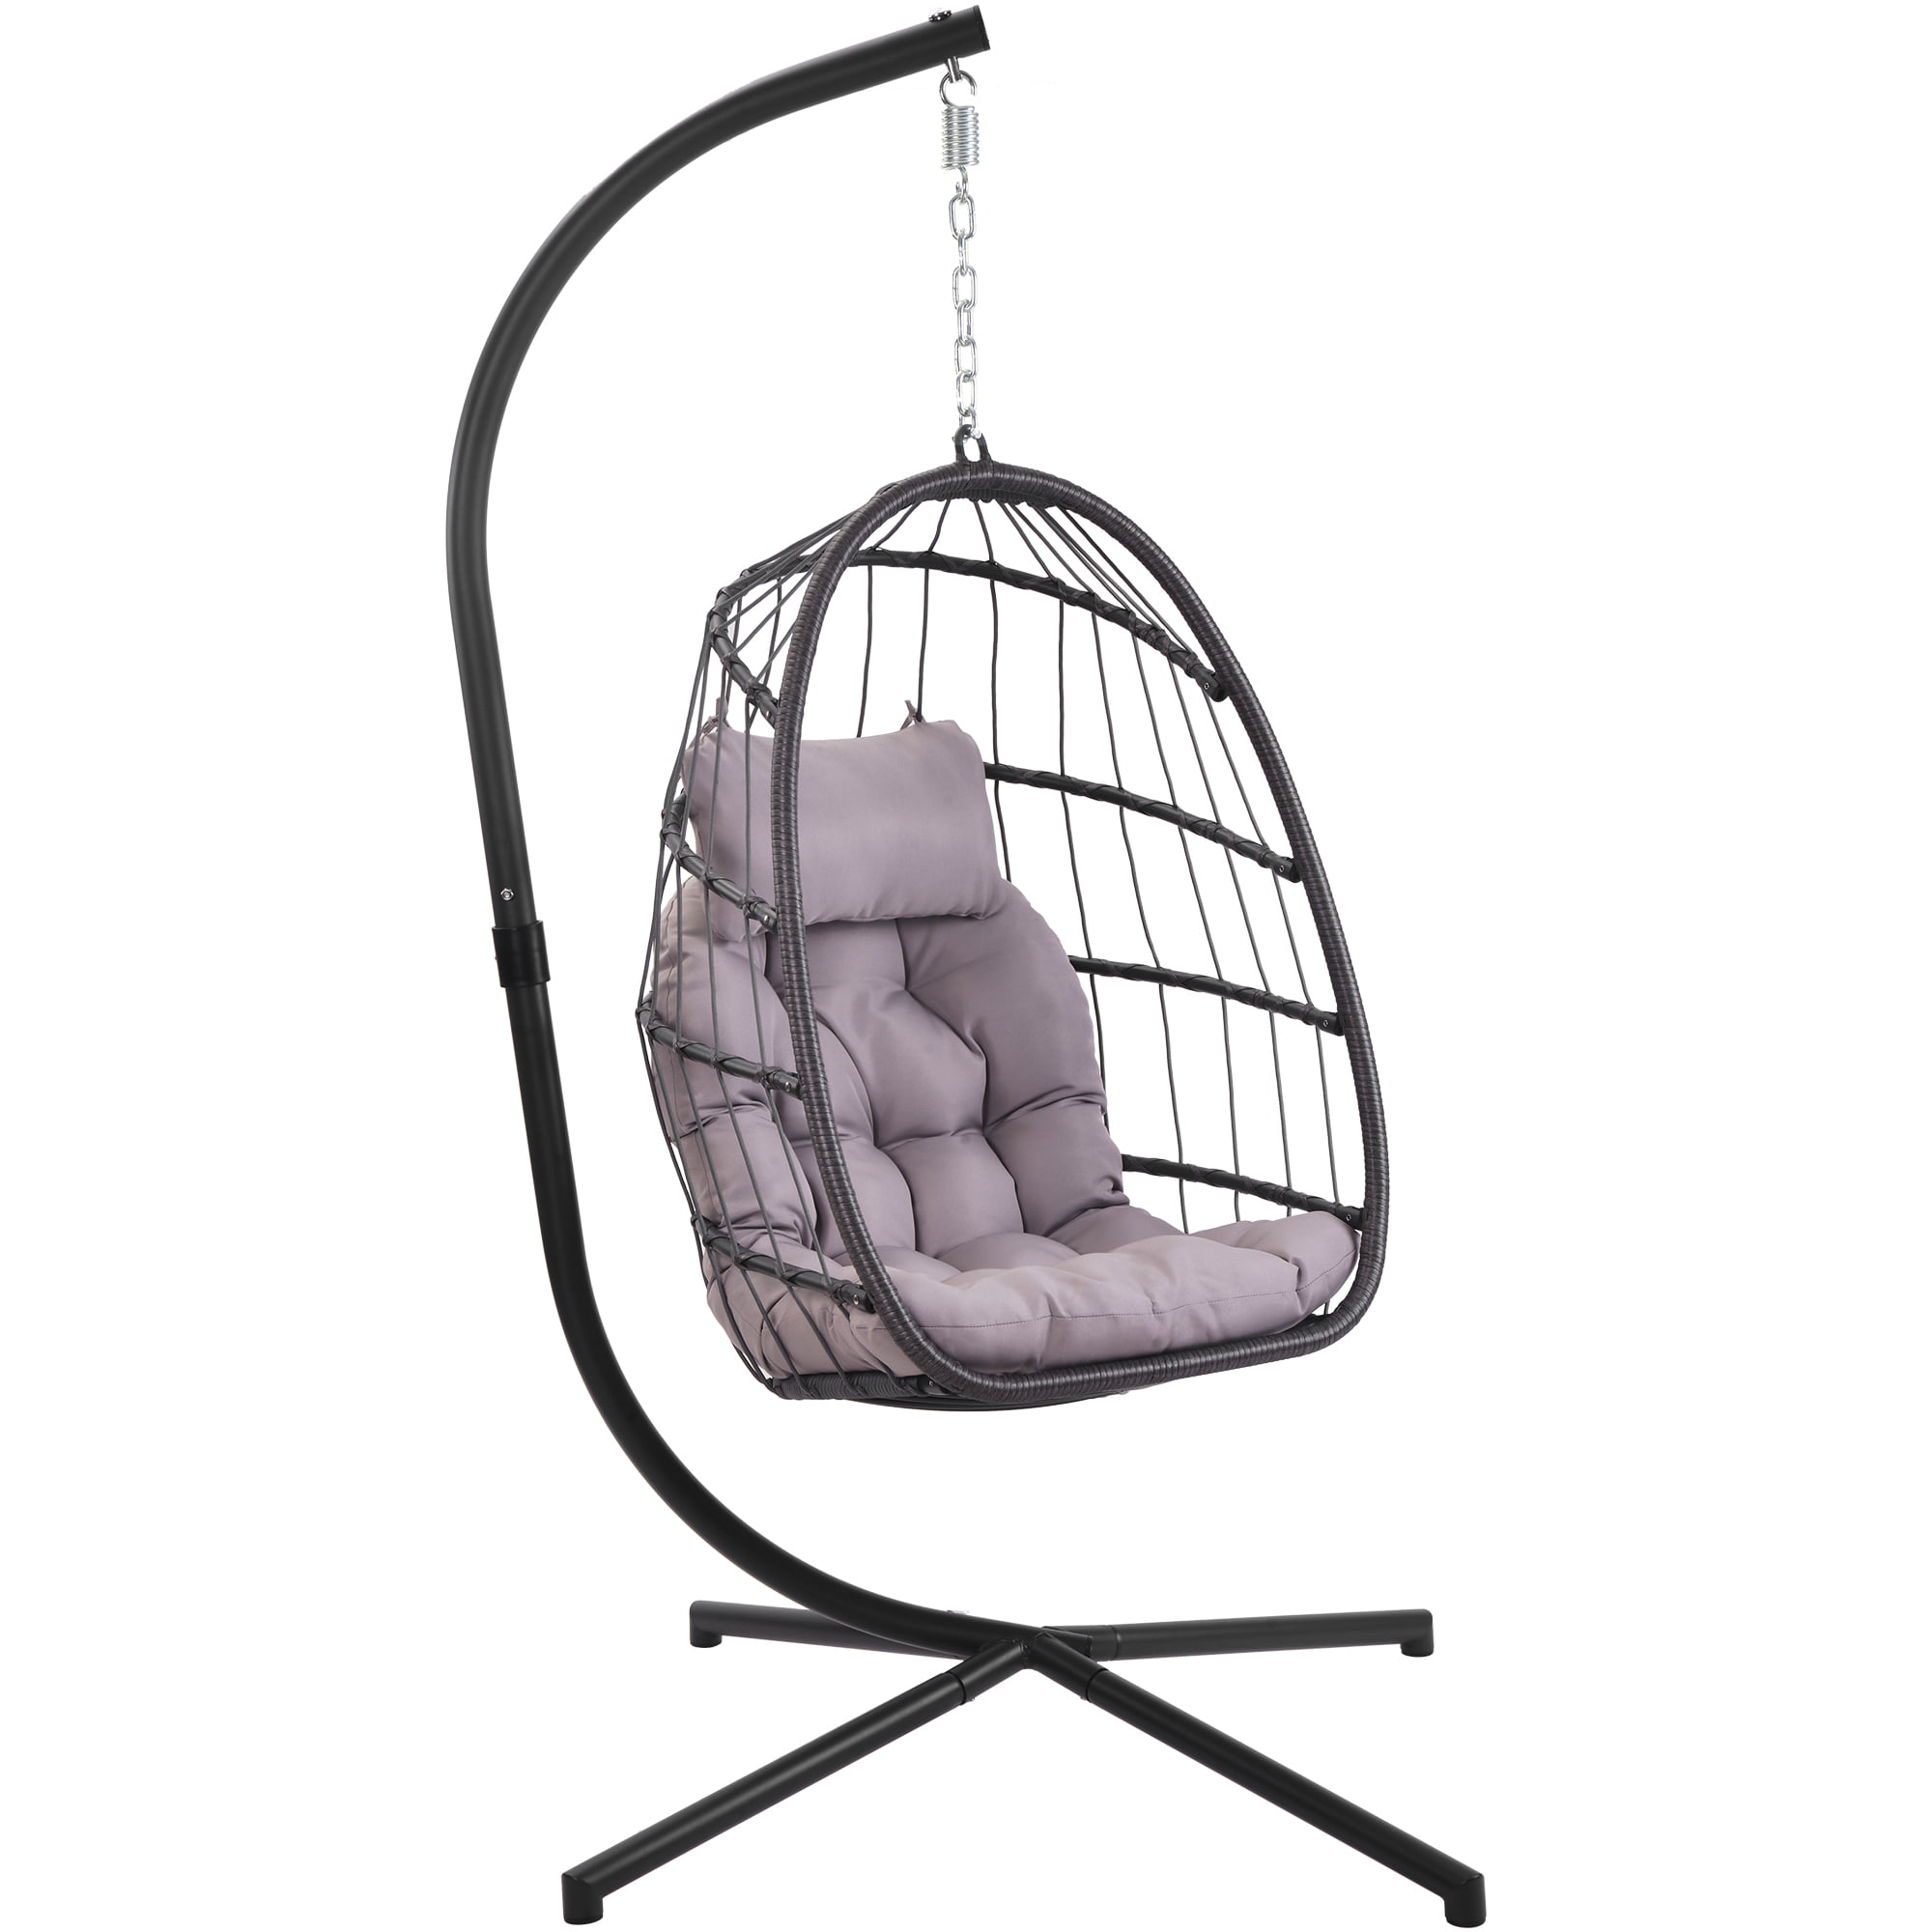 Clearance Hanging Wicker Egg Chair Outdoor Patio Hanging Chairs With Stand Uv Resistant Hammock Chair With Comfortable Gray Cushion Durable Indoor Swing Egg Chair For Garden Backyard 350lbs Walmart Com Walmart Com